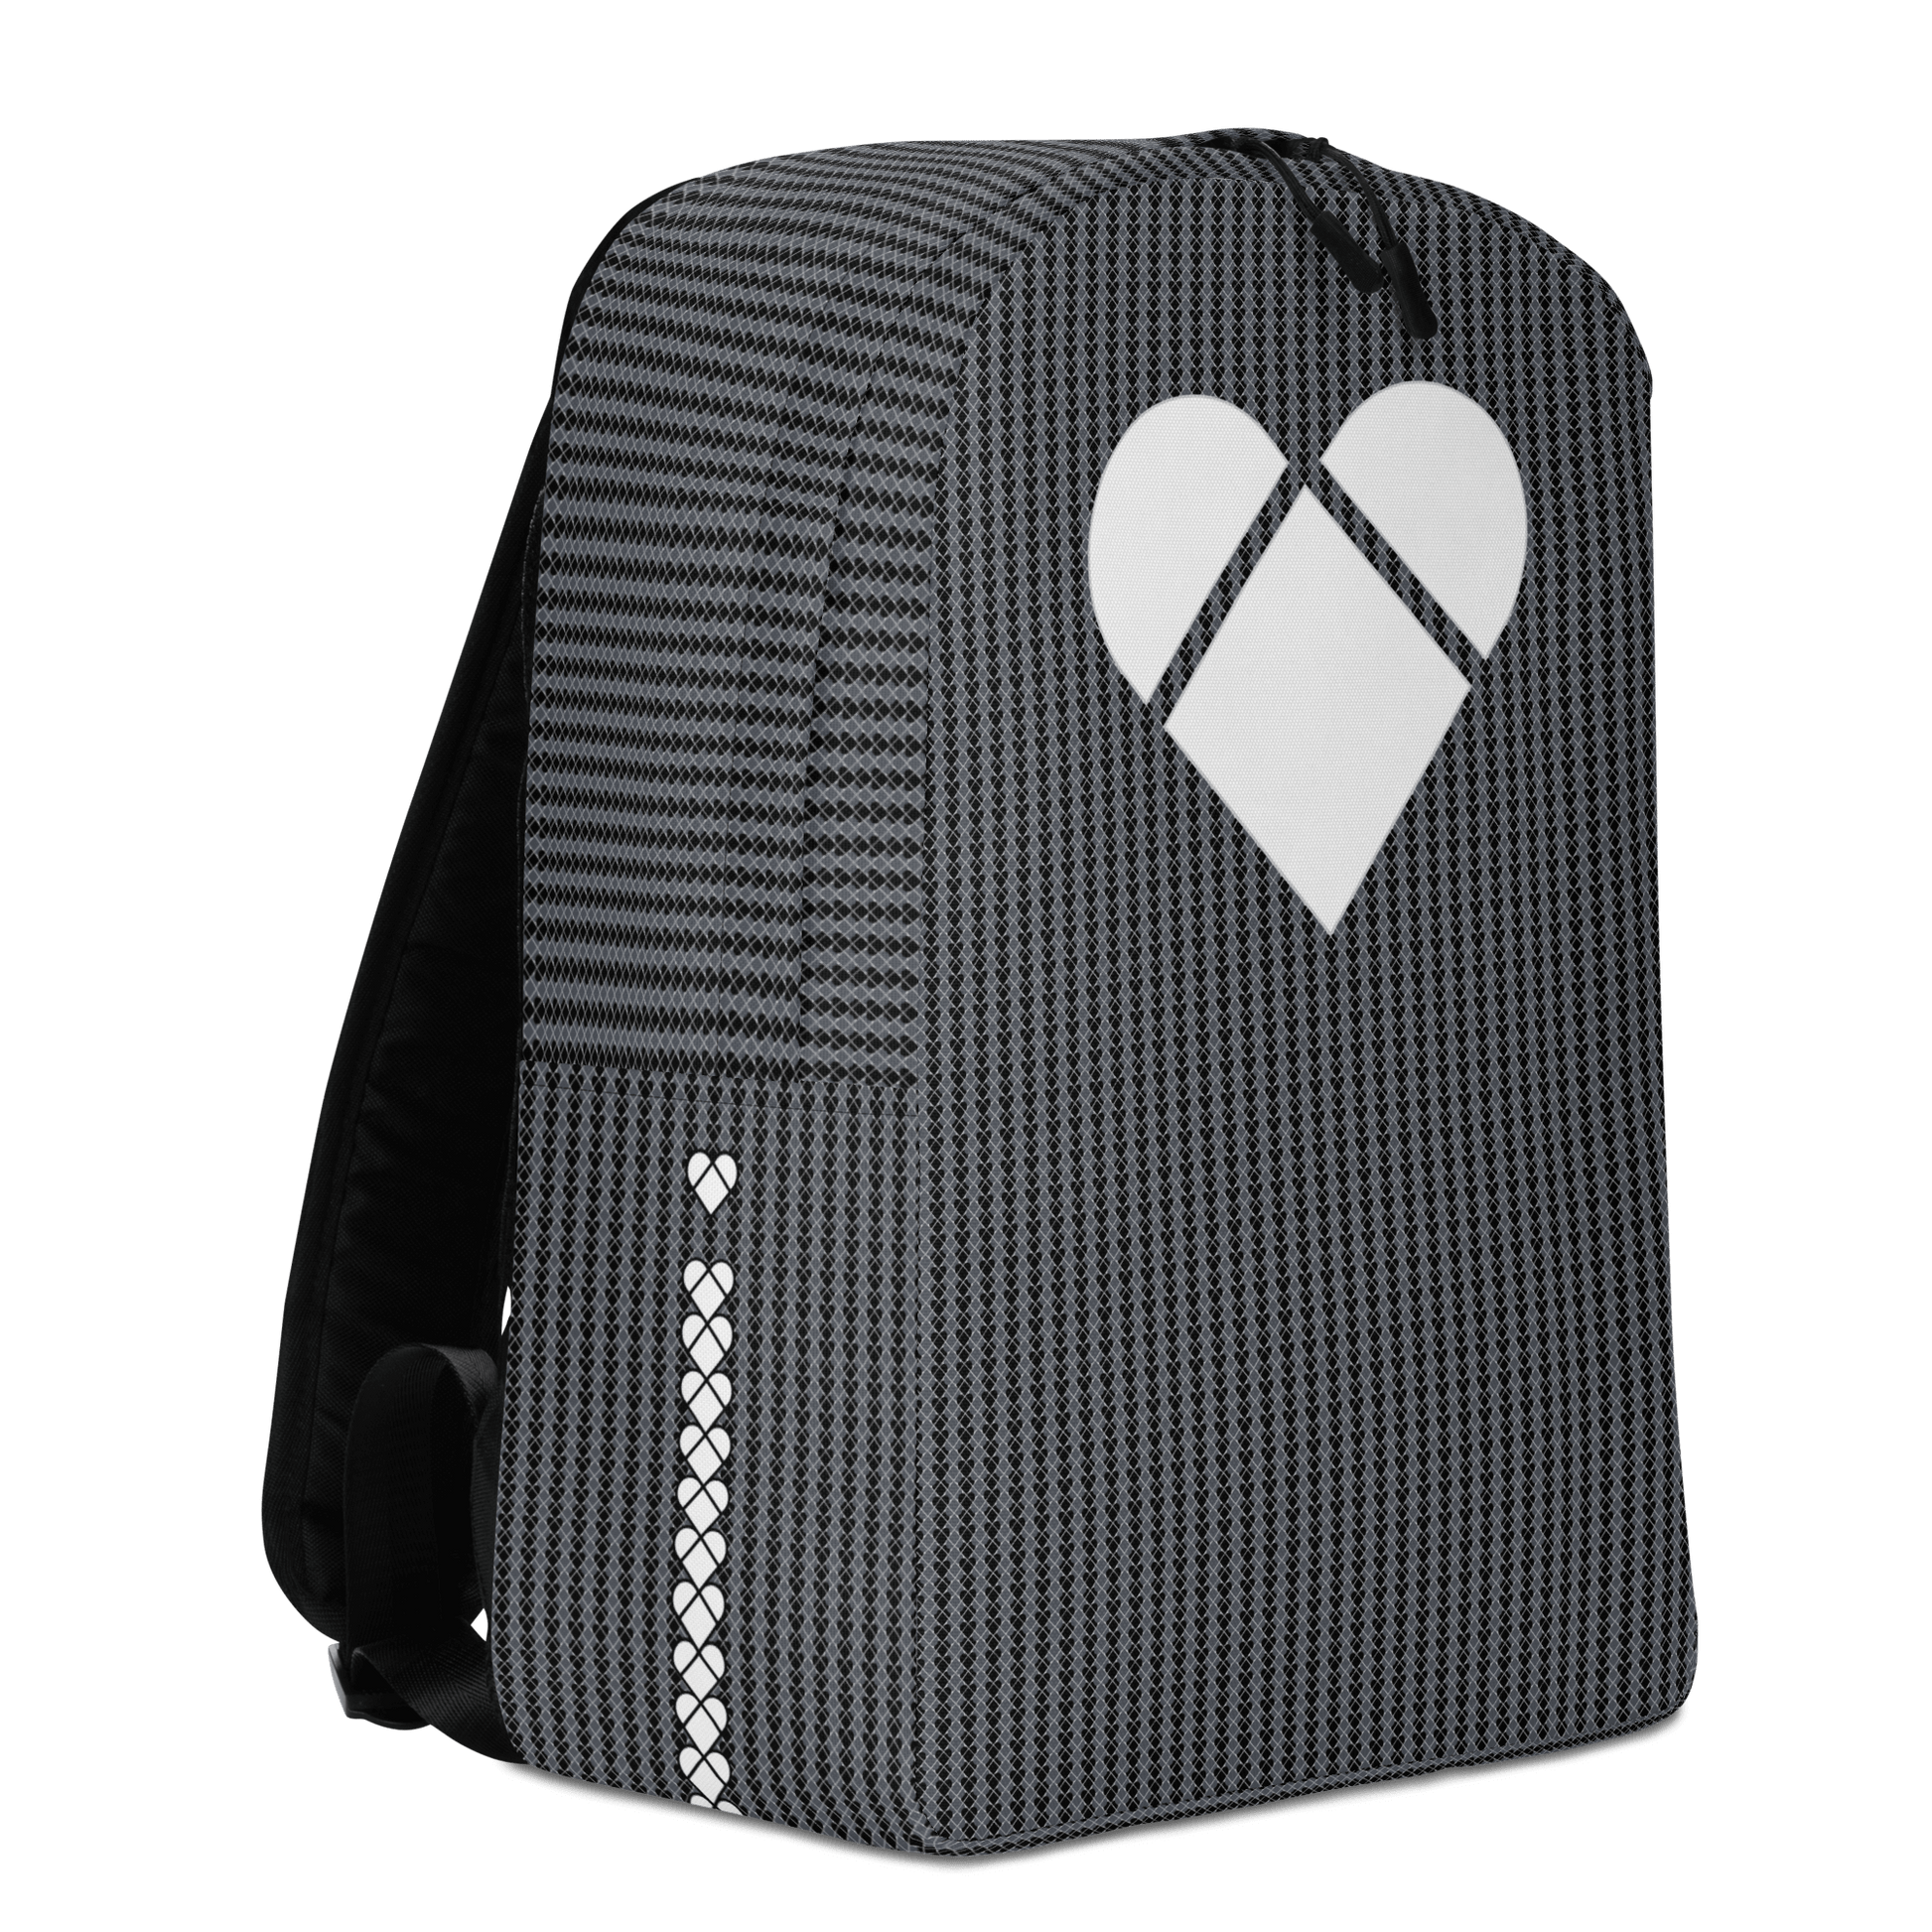 side view of a Fashionable backpack for the modern millennial and Gen Z from CRiZ AMOR